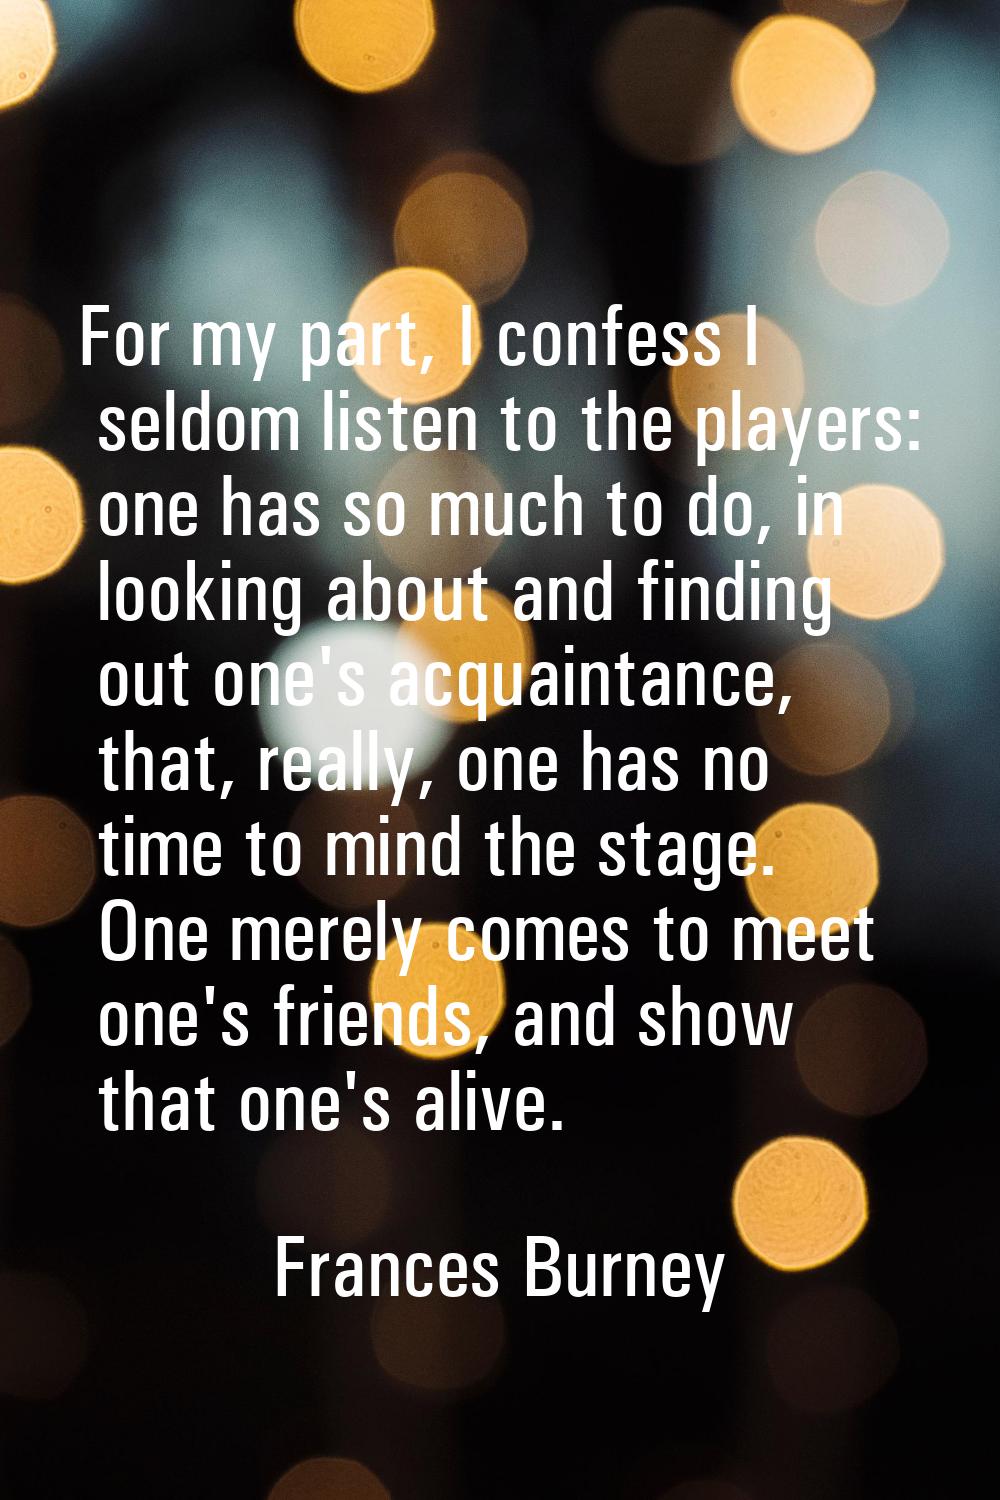 For my part, I confess I seldom listen to the players: one has so much to do, in looking about and 